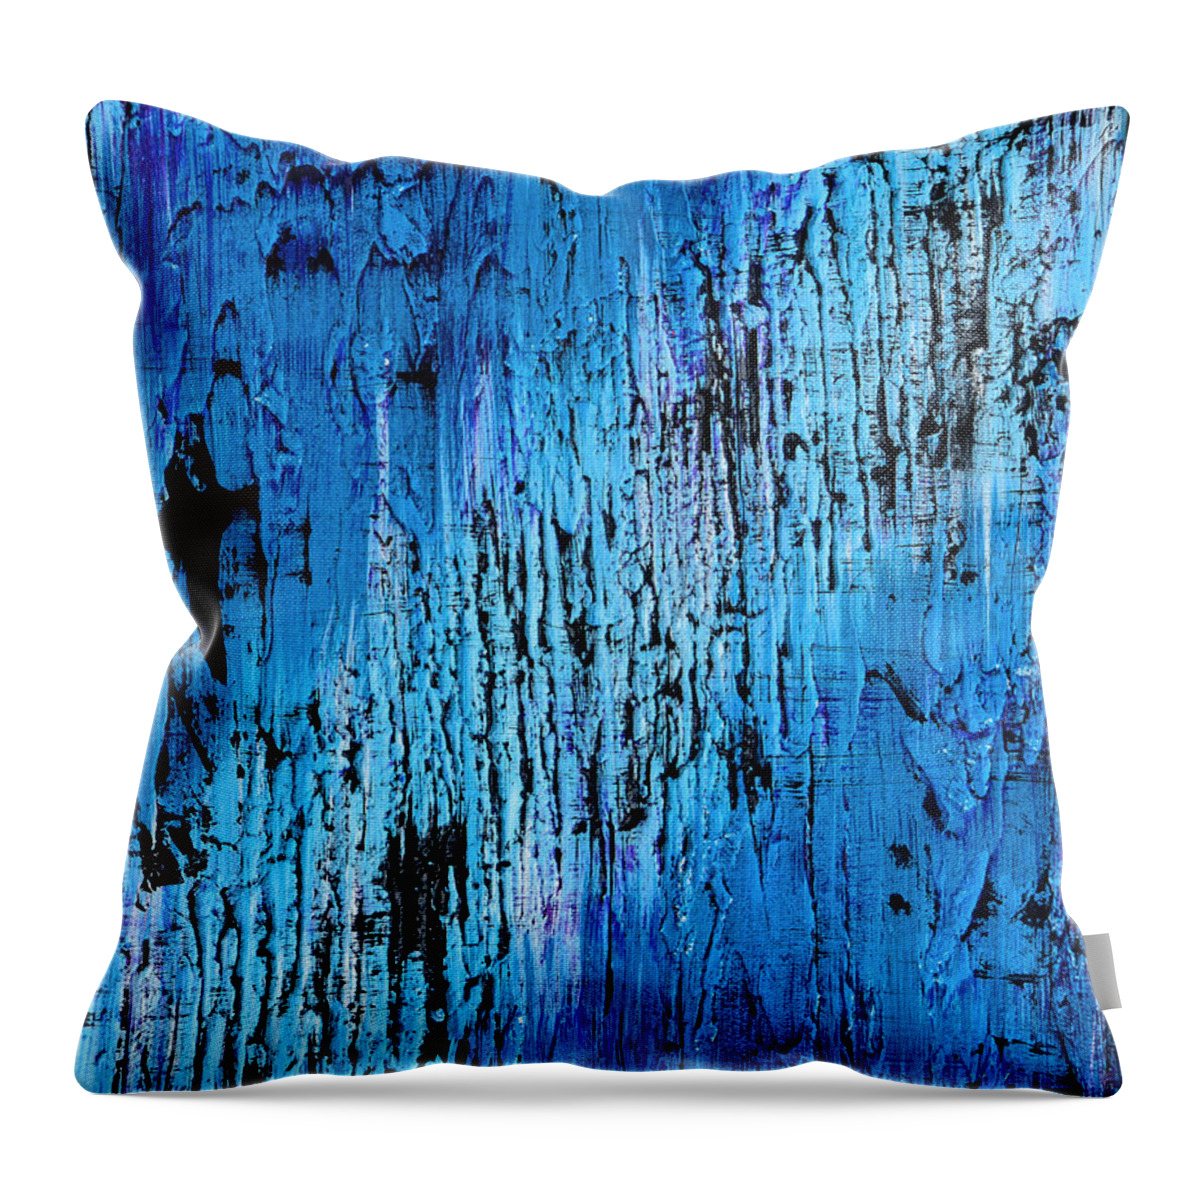 Waterfall Throw Pillow featuring the painting On Edge by Alys Caviness-Gober